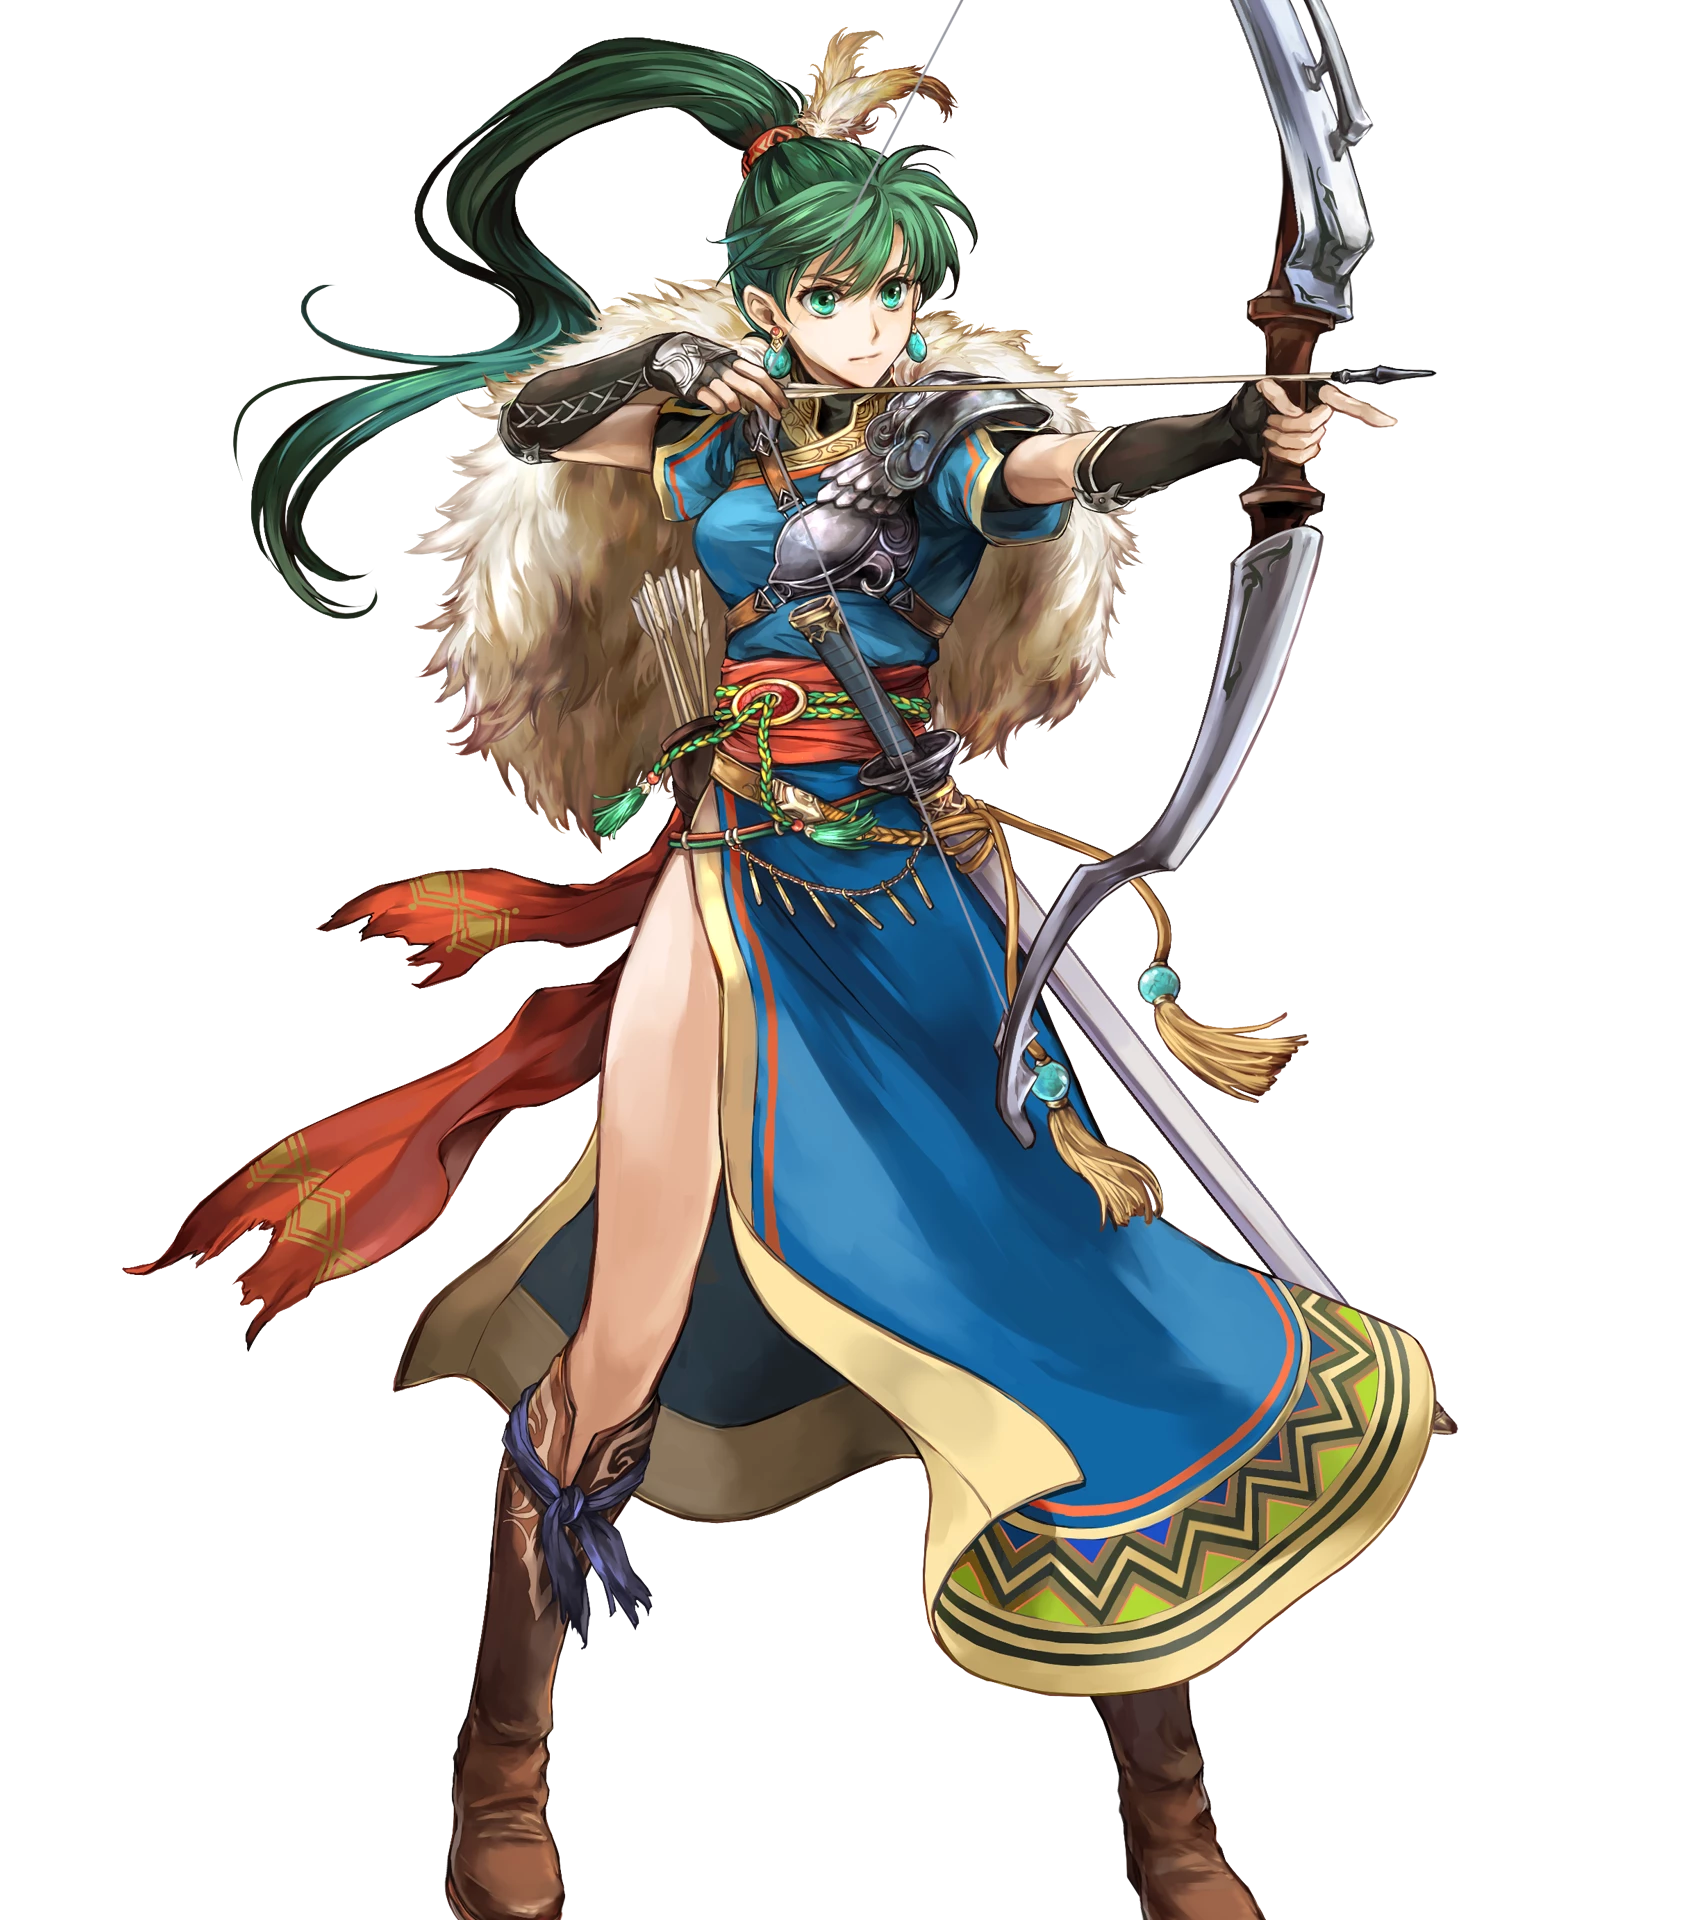 Lyn: Lady of the Wind by Wada Sachiko